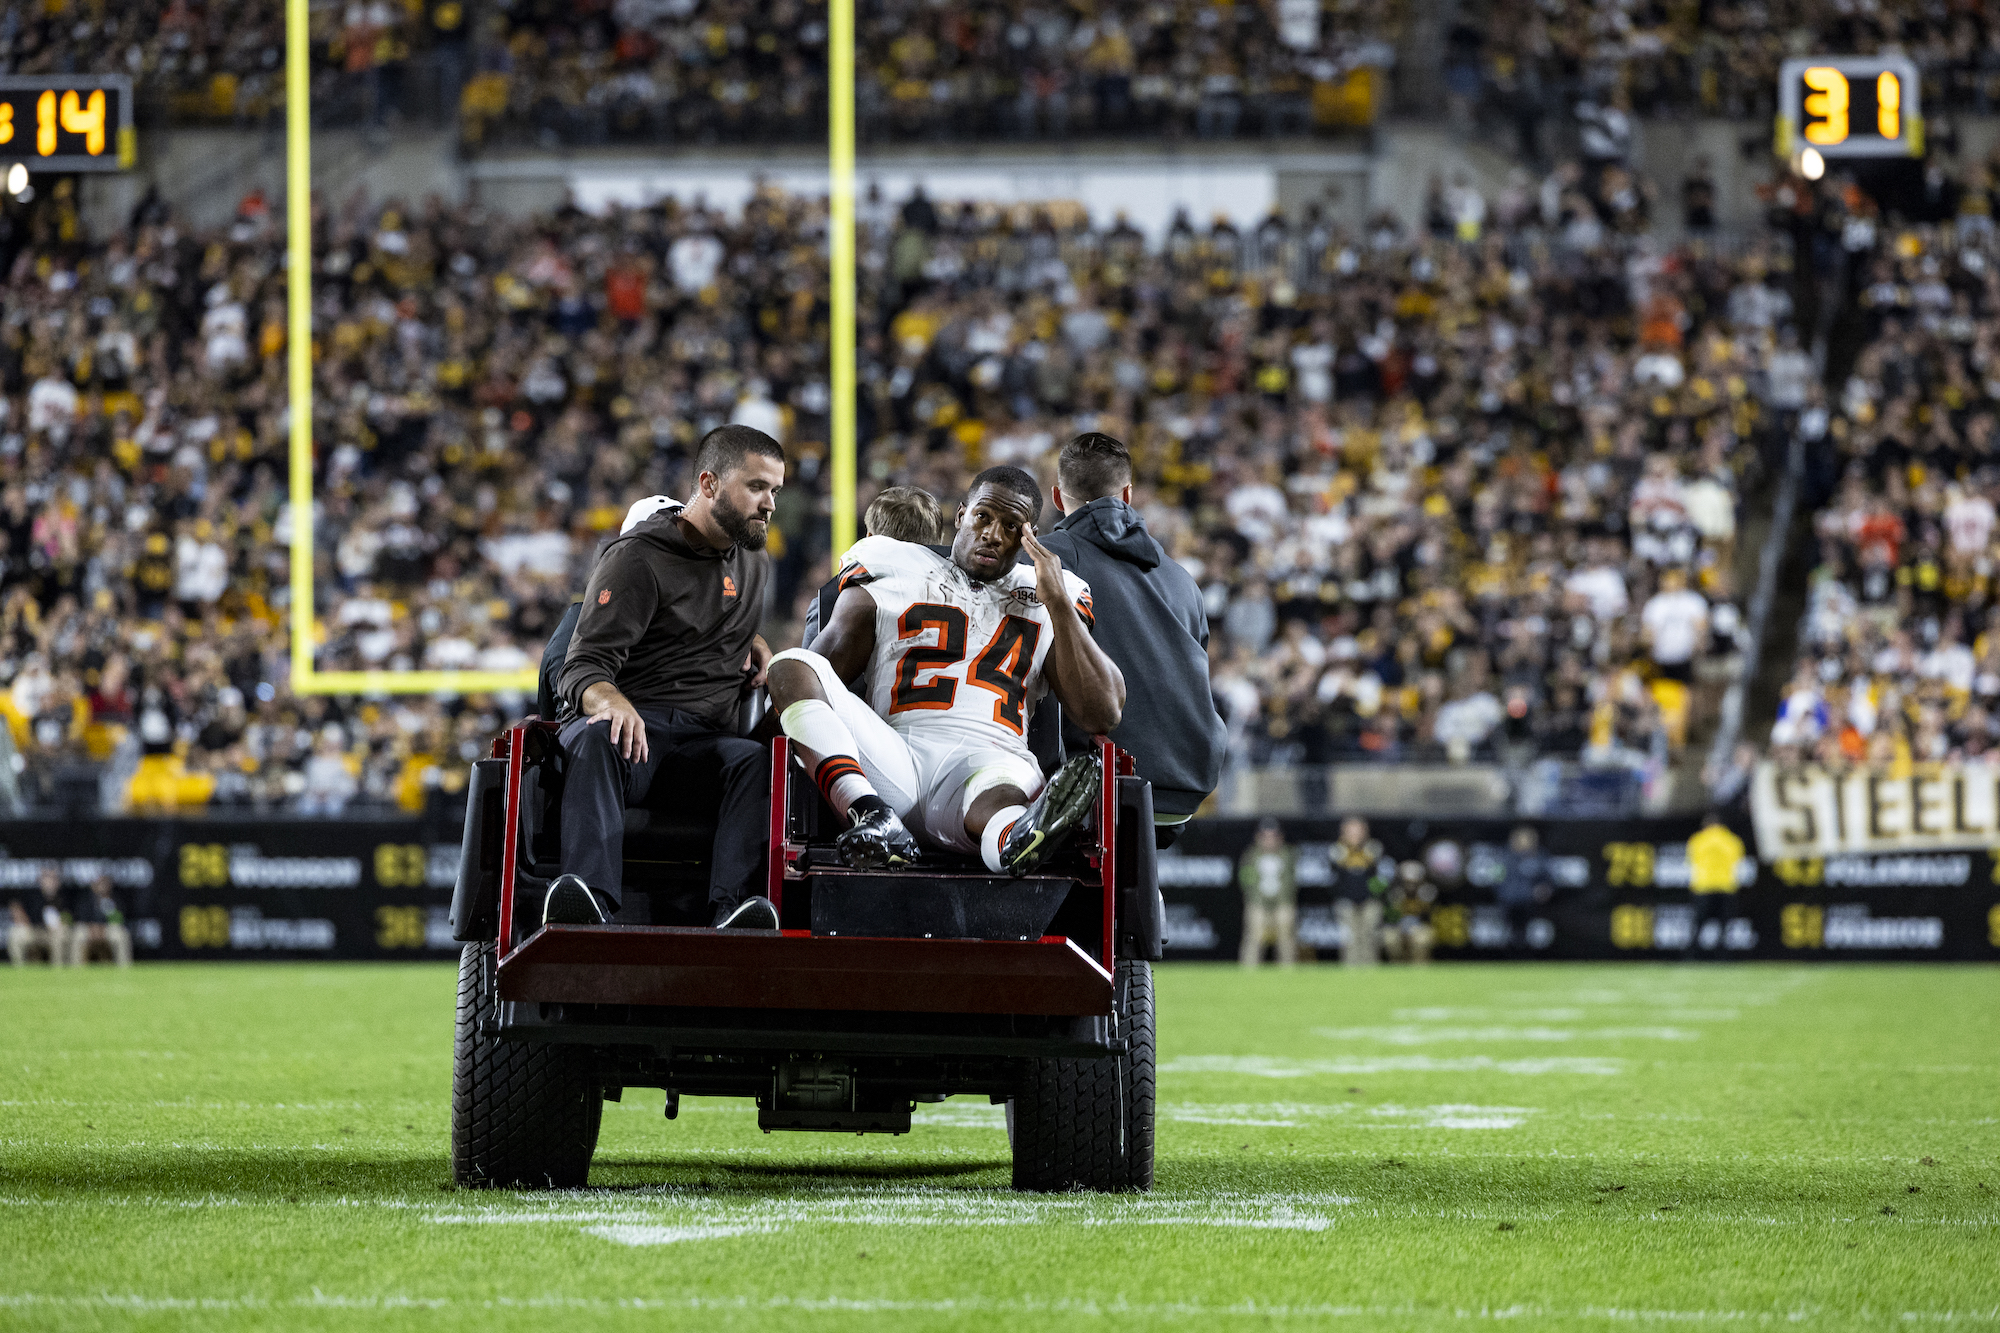 PITTSBURGH, PENNSYLVANIA - SEPTEMBER 18: Nick Chubb #24 of the Cleveland Browns is carted off of the field after hurting his knee during the second quarter of the game against the Pittsburgh Steelers at Acrisure Stadium on September 18, 2023 in Pittsburgh, Pennsylvania. (Photo by Lauren Leigh Bacho/Getty Images)